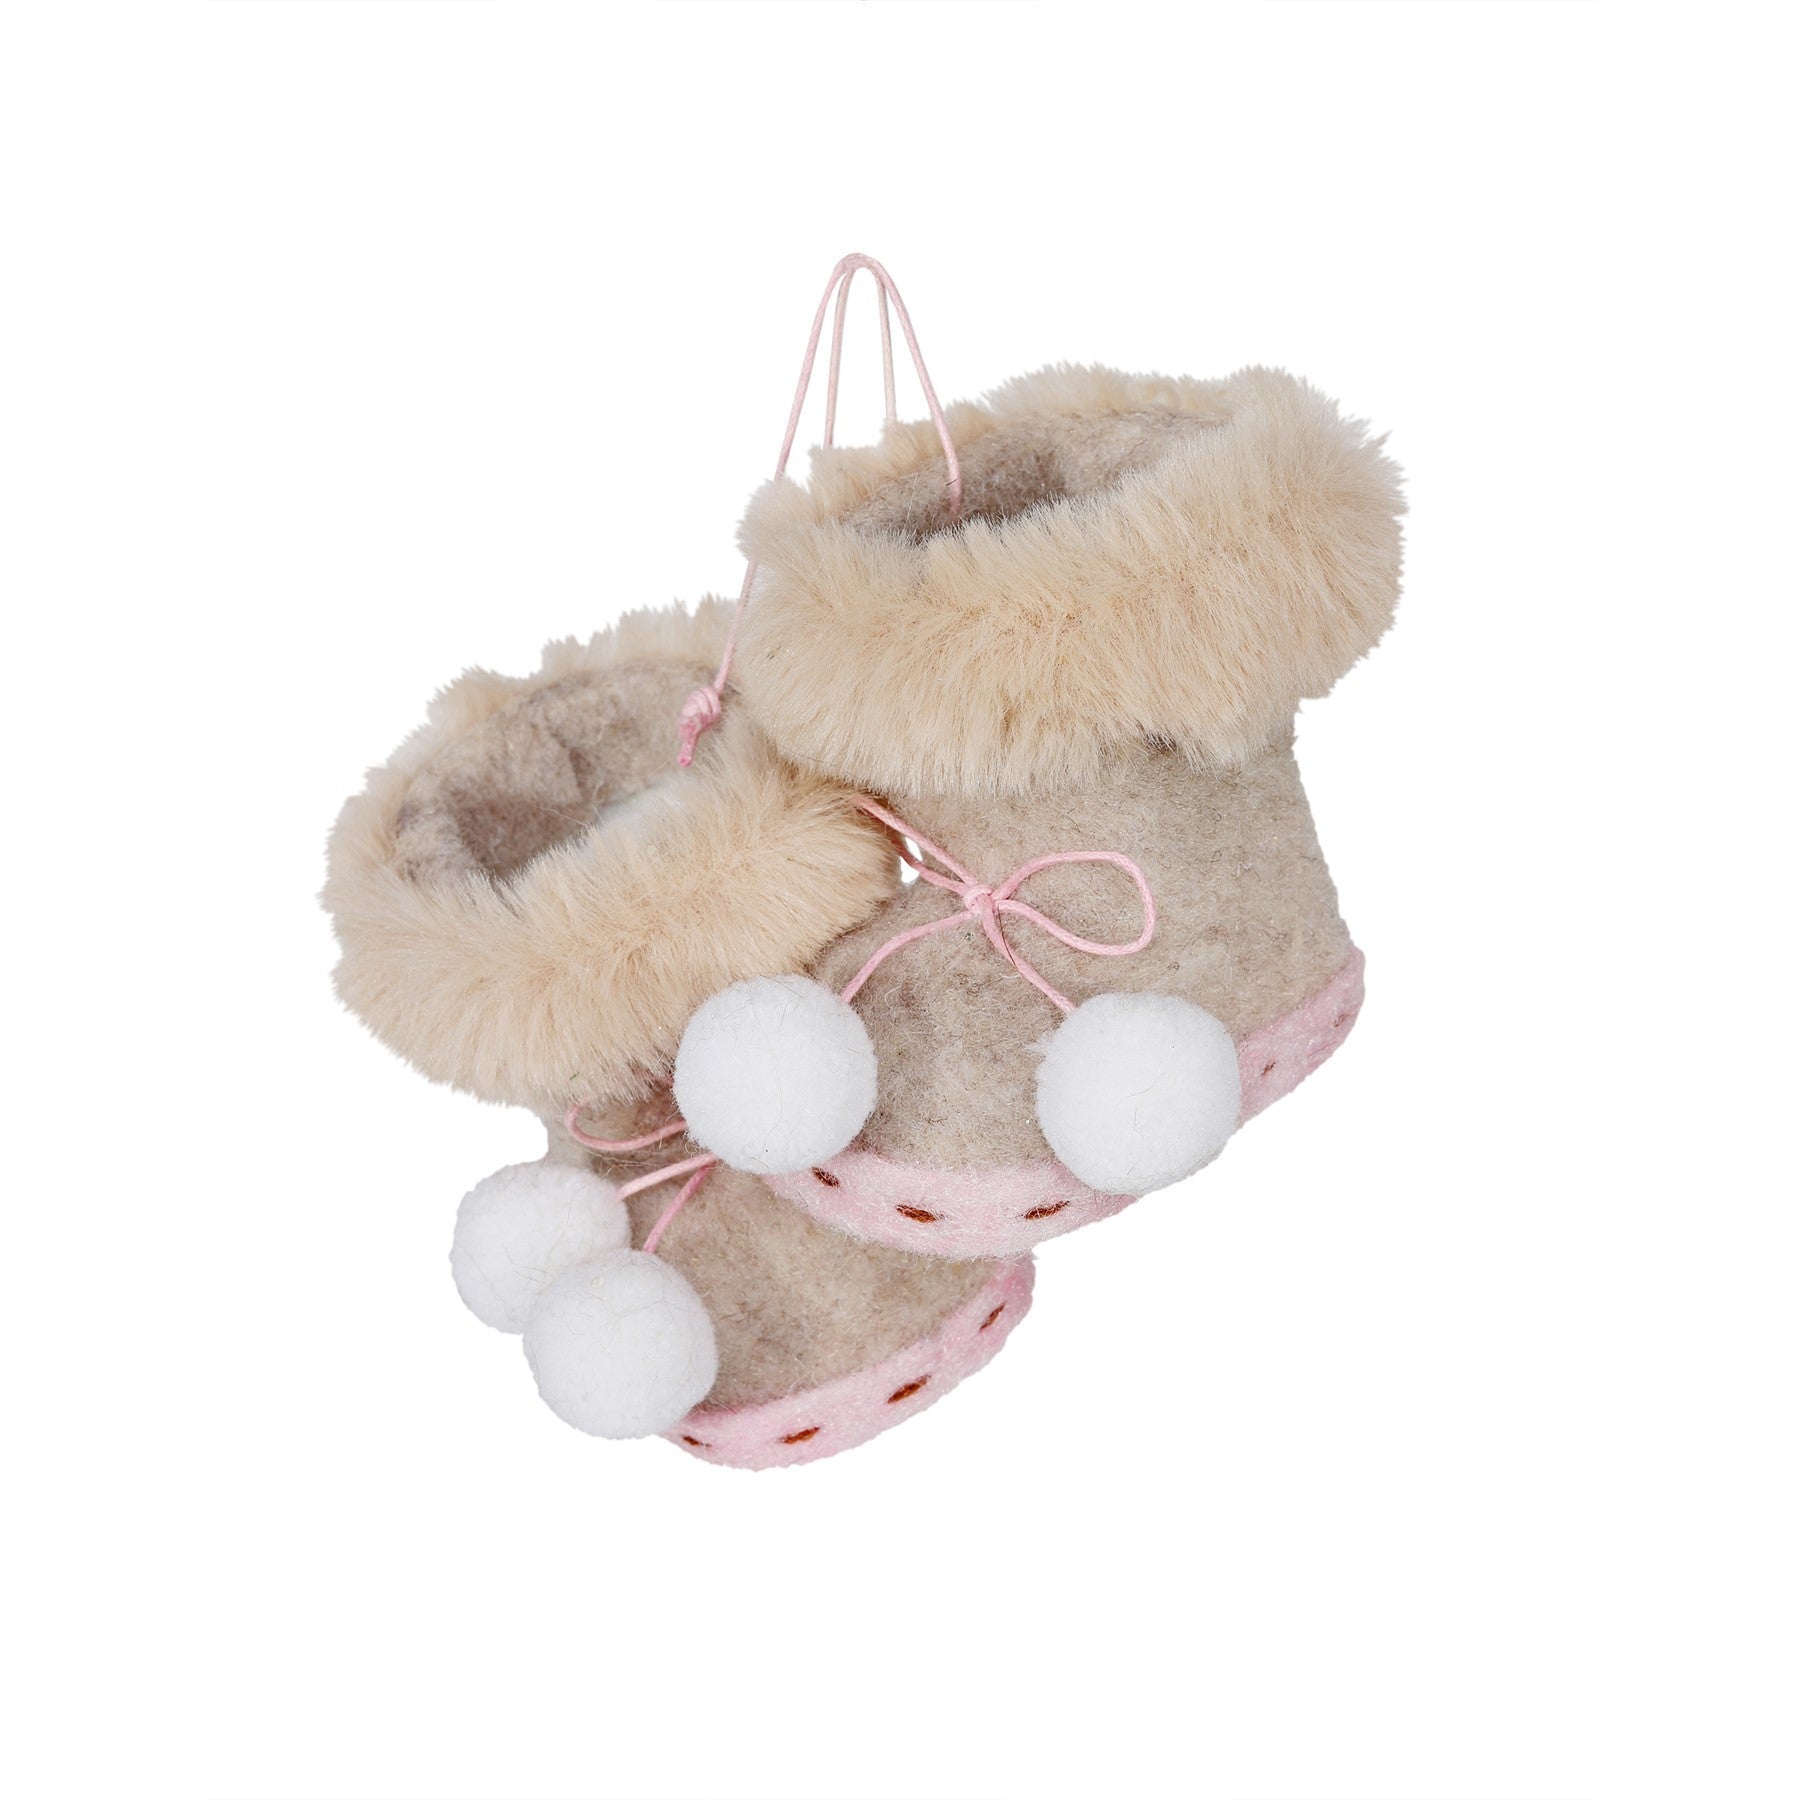 View Christmas Beige and Pink Felt Boots information